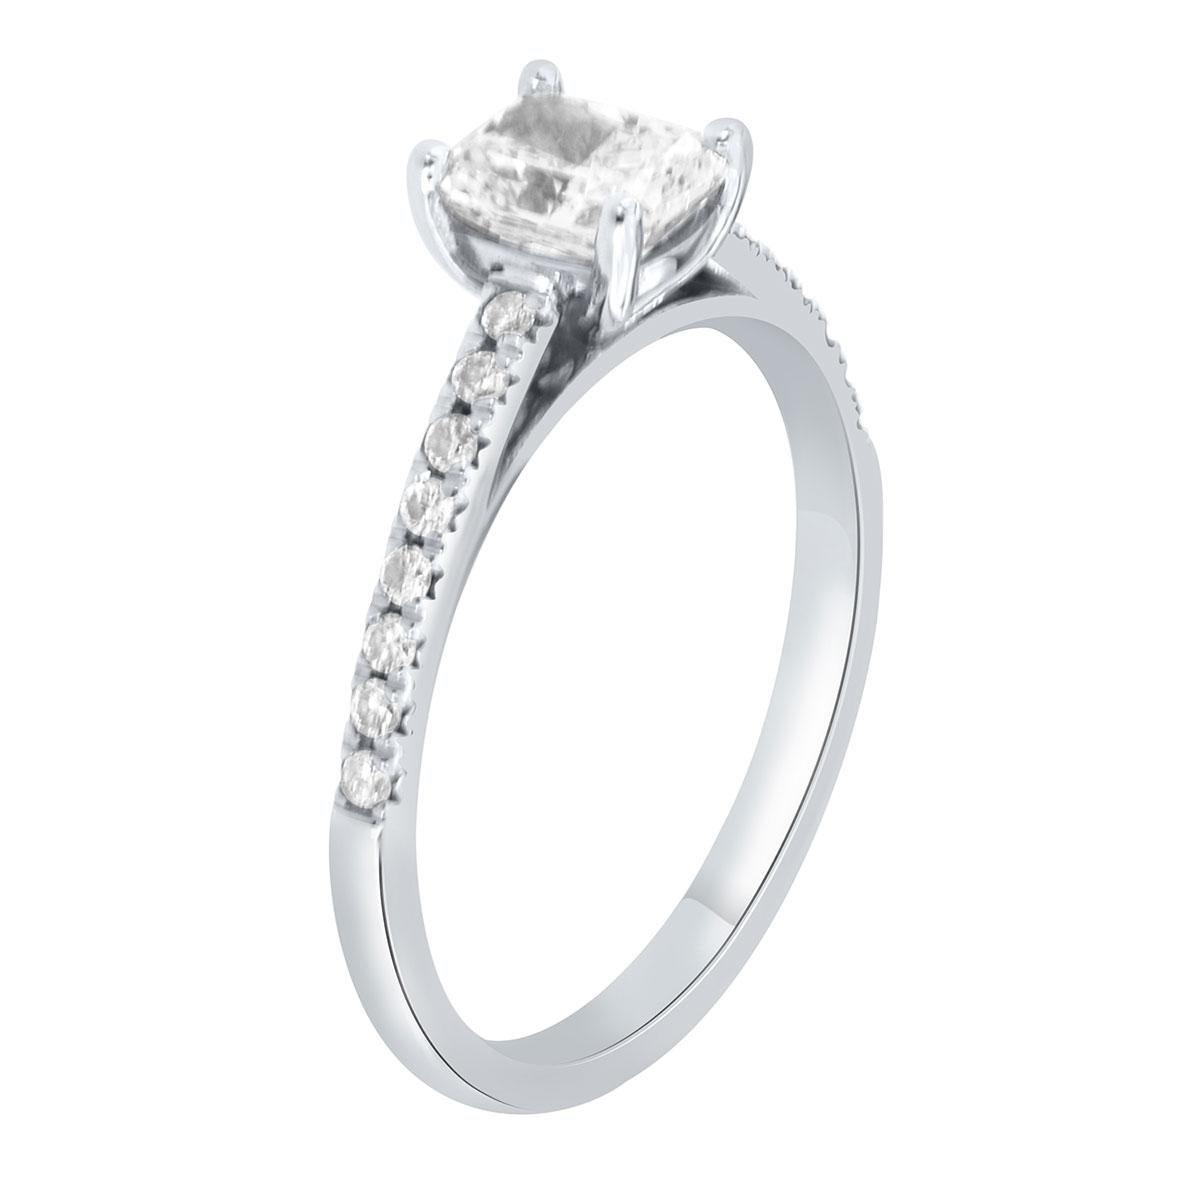 This ring features 16 round brilliants diamonds French Pave Set on a 1.6 mm shank in total carat weight of 0.35 Carat. Our signature prong basket will maximize your center gem light reflection. Your future matching band will sit flashed with the